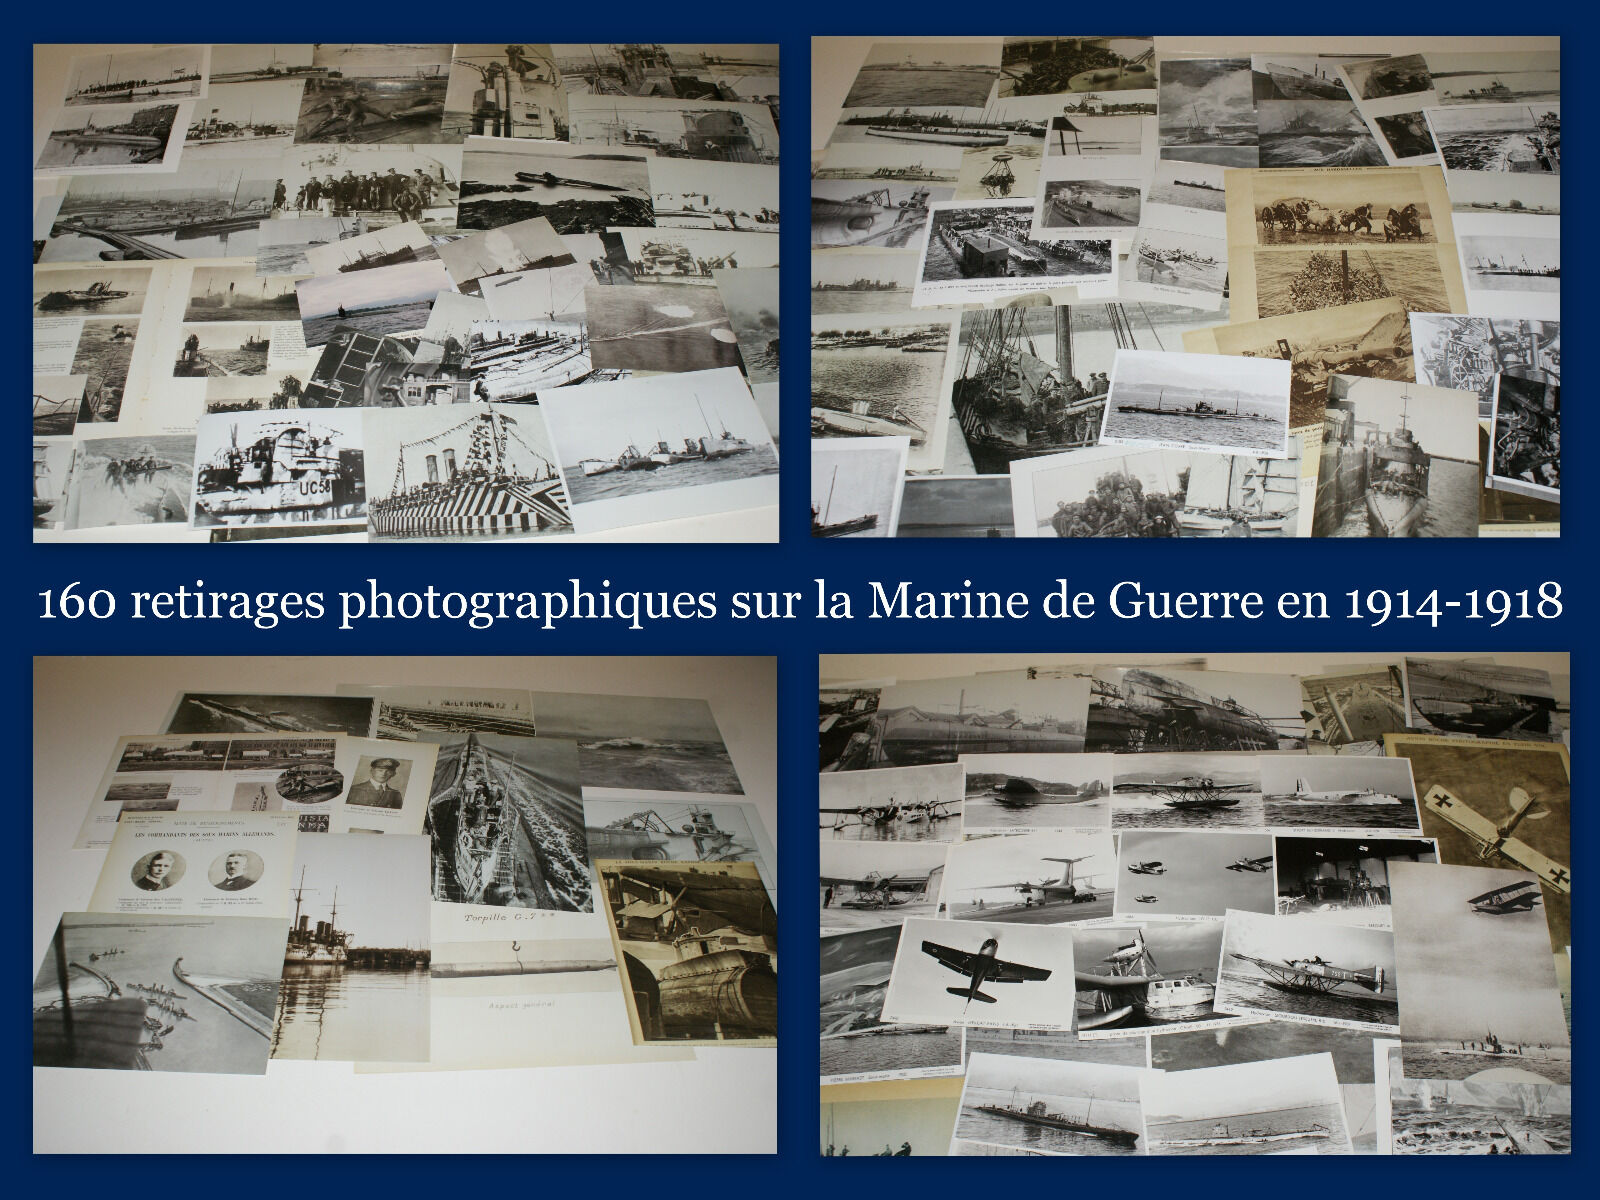 WAR 1914-1918 OVER 160 PHOTOGRAPHIC REPRODUCTIONS ON THE NAVY